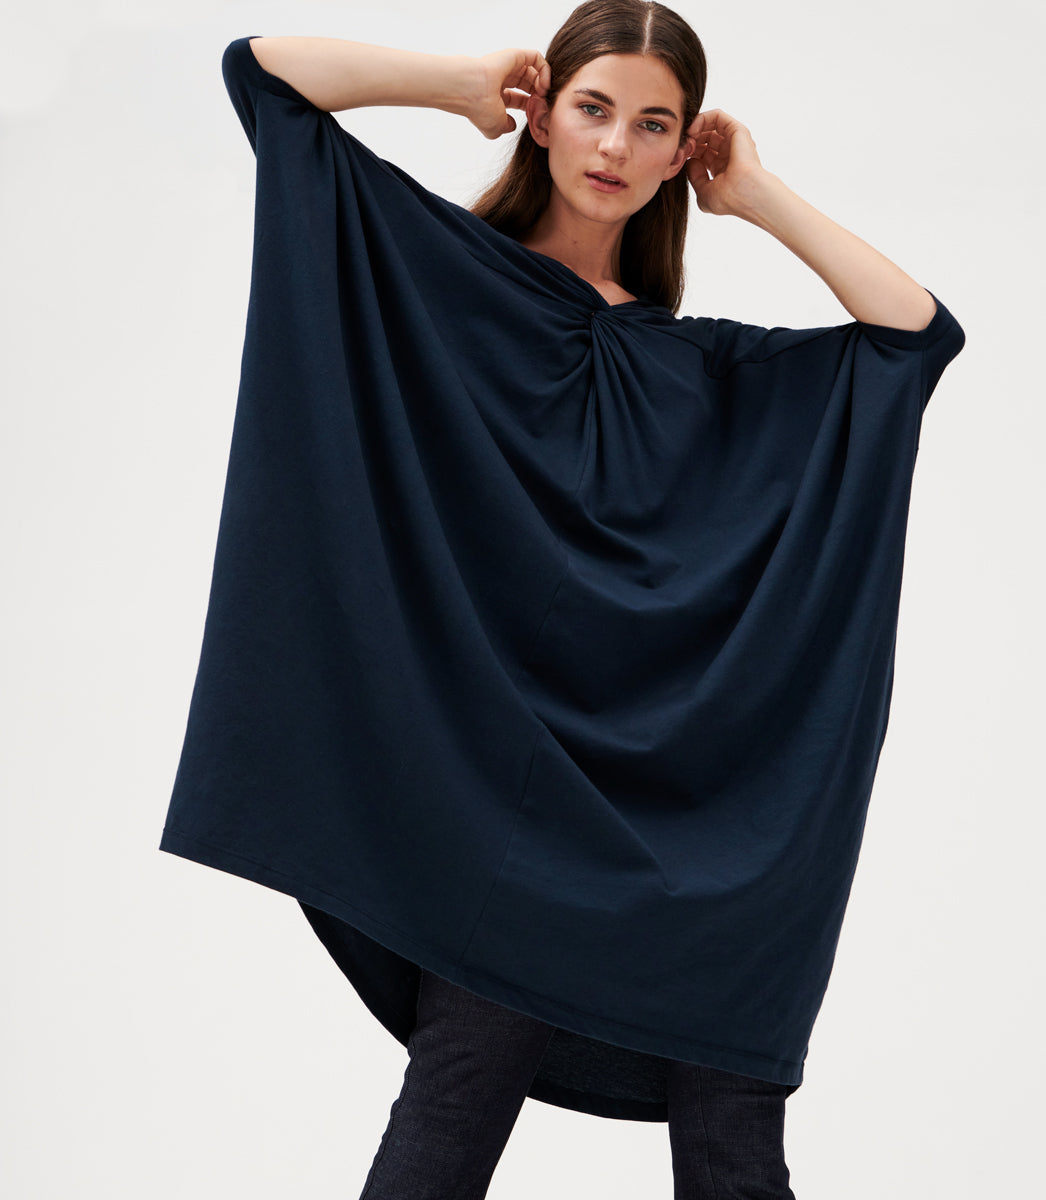 Cuspi External Twist Dress in Ink and Freedom Kick Flare in Dark Denim. Top features front twisting detail and a effortless box cut shape. Designed and made in Melbourne, Australia.